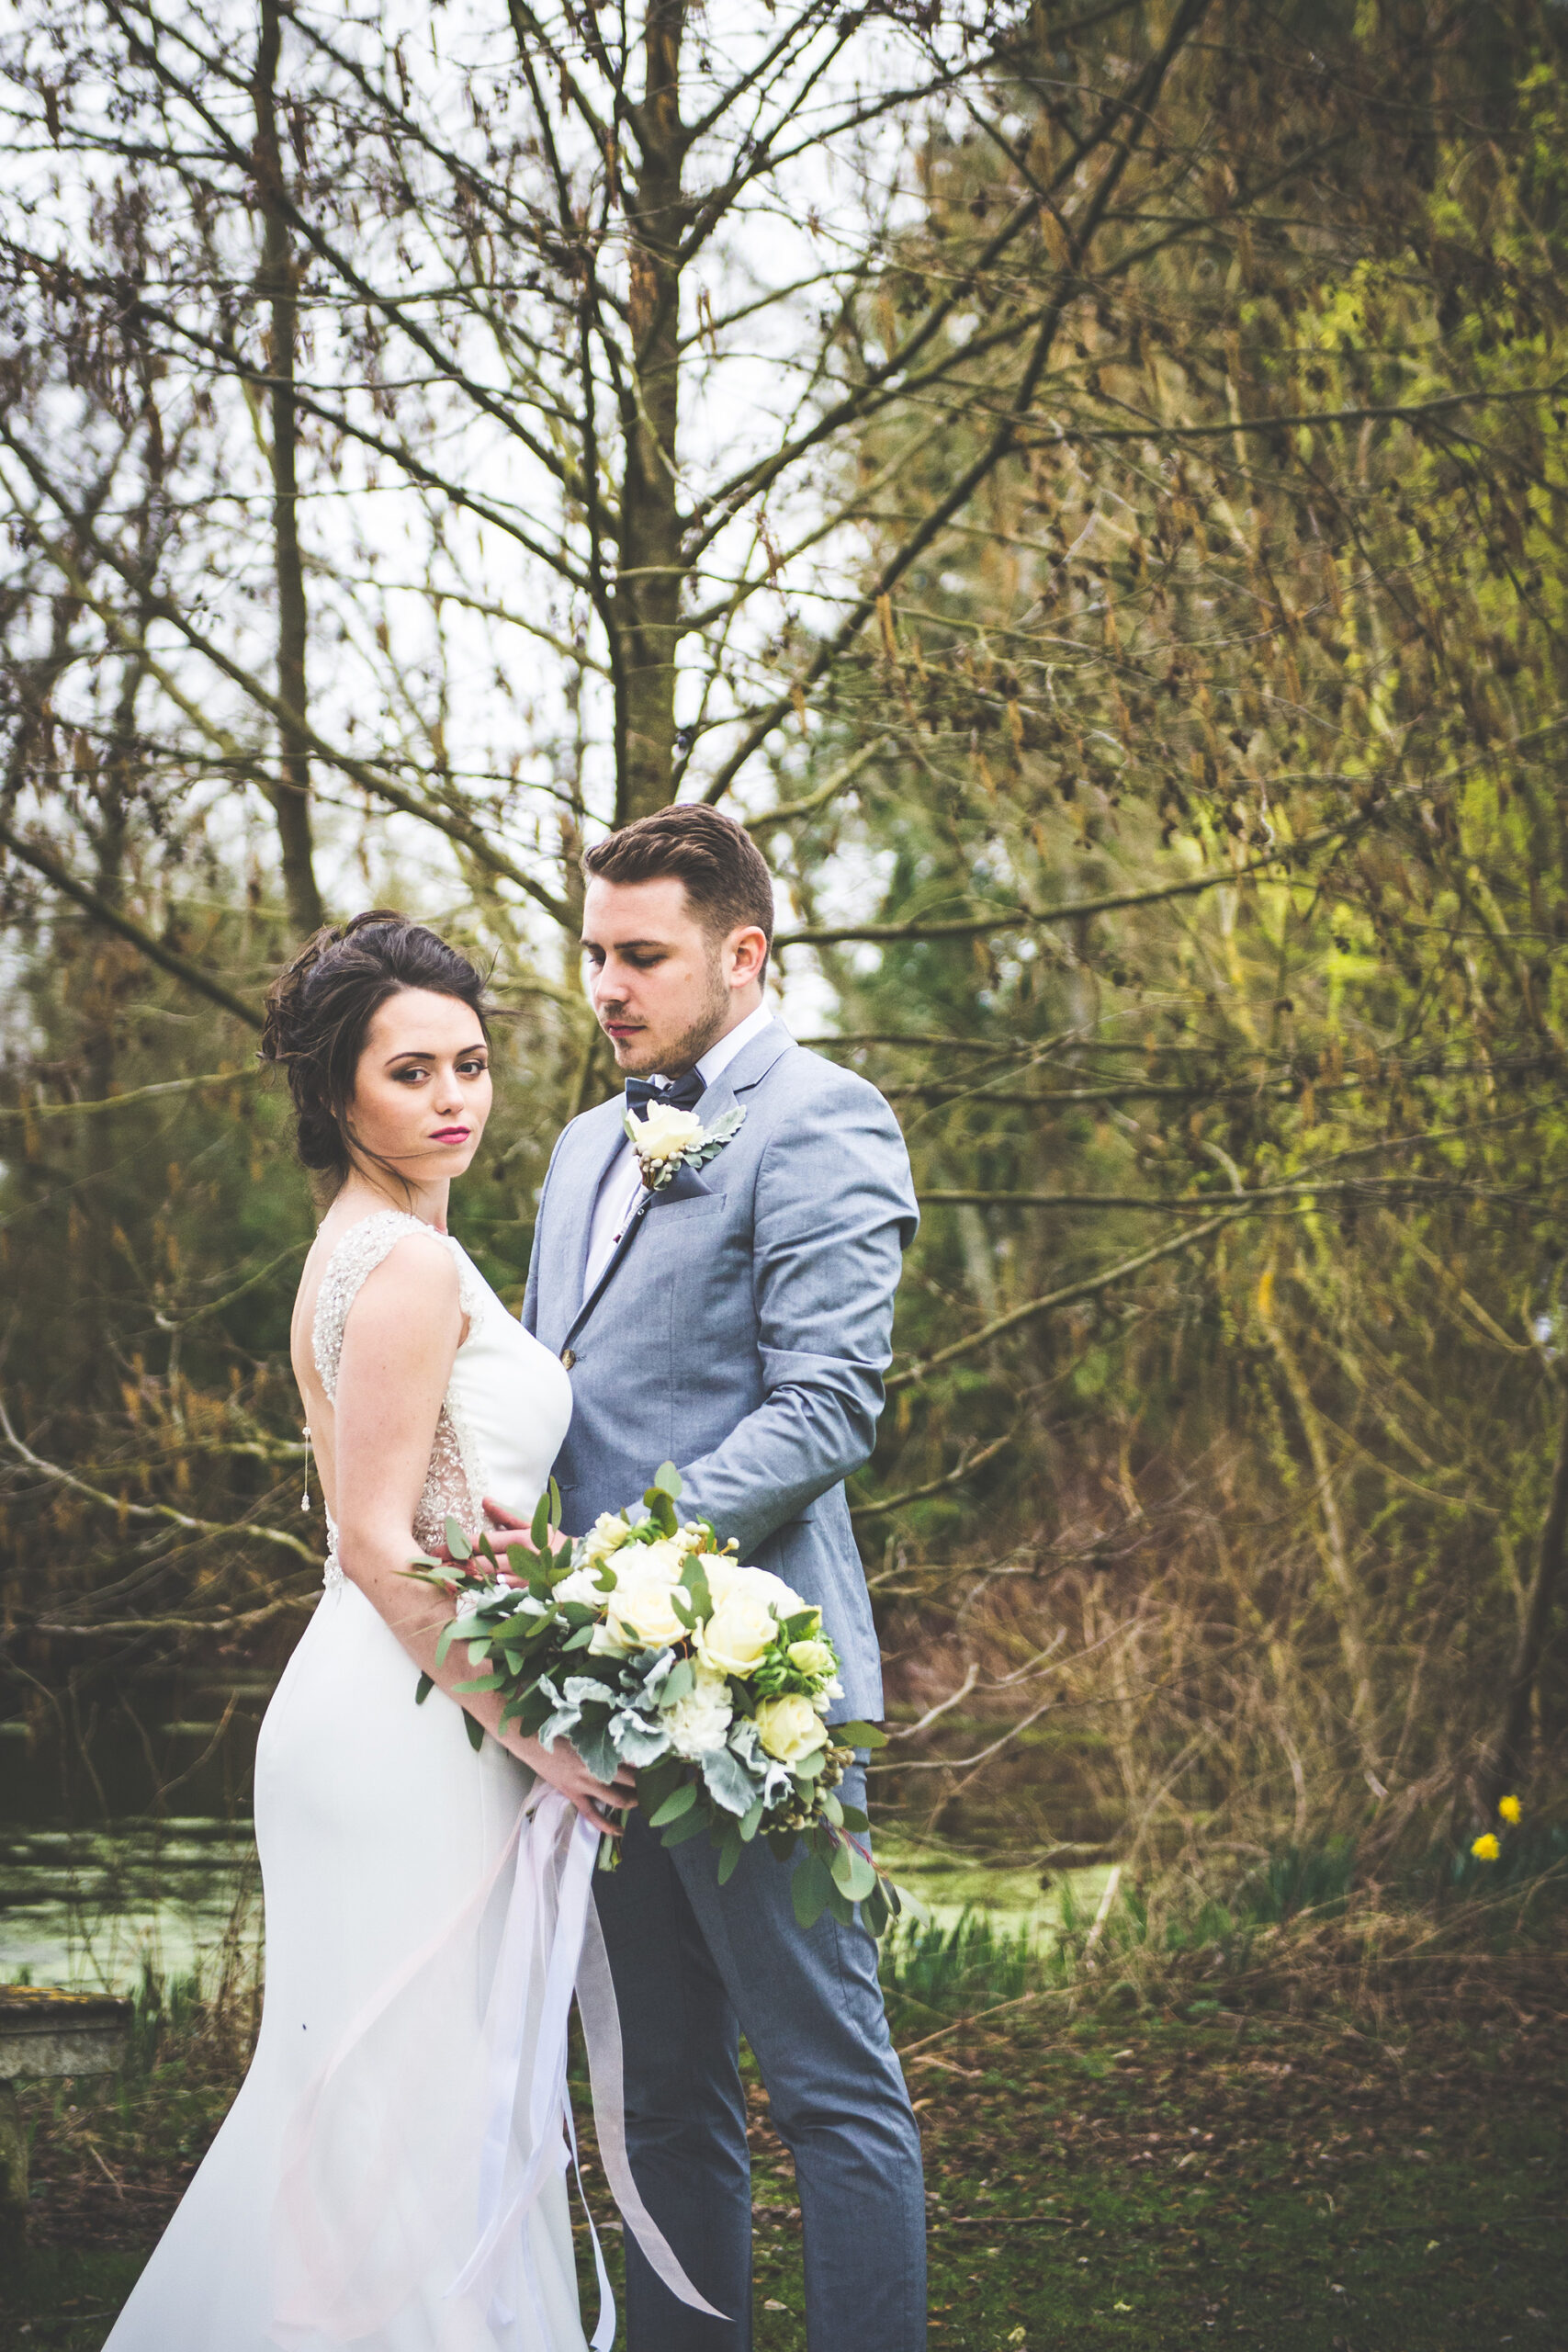 Rustic_Chic_Wedding_Inspiration-A_Knights_Tale_Photography_SBS_014